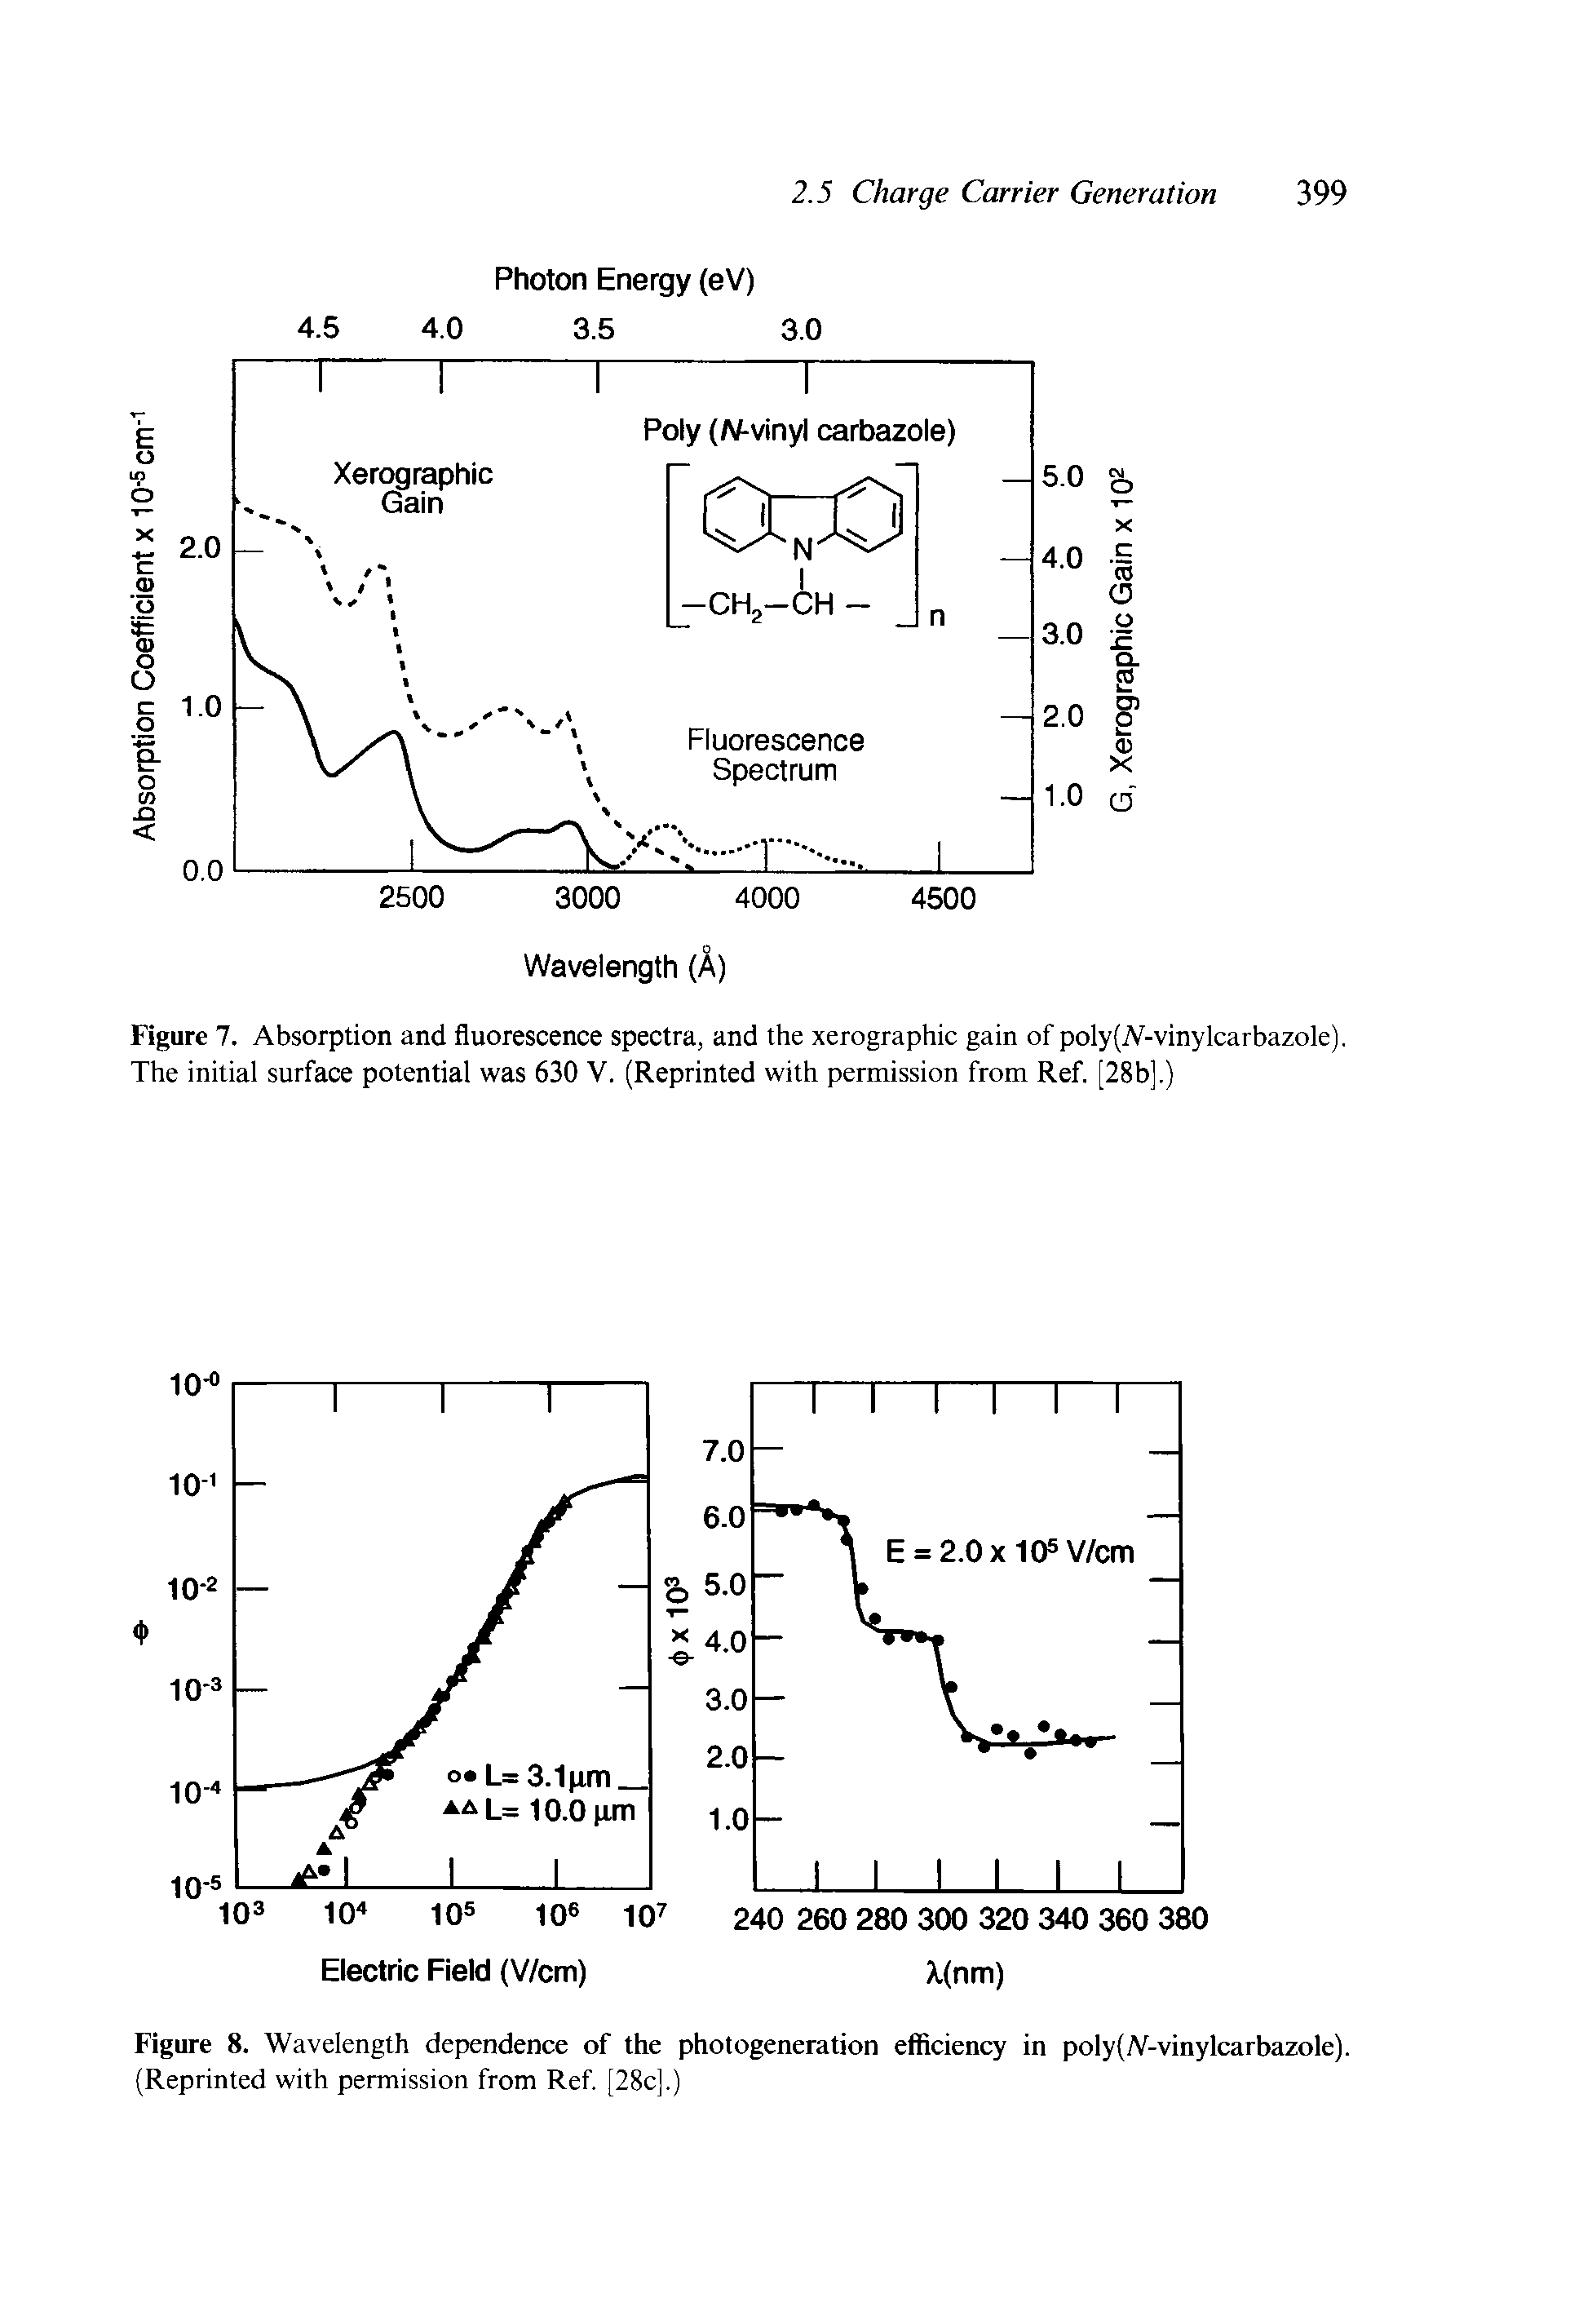 Figure 8. Wavelength dependence of the photogeneration efficiency in poly(Ar-vinylcarbazole). (Reprinted with permission from Ref [28c].)...